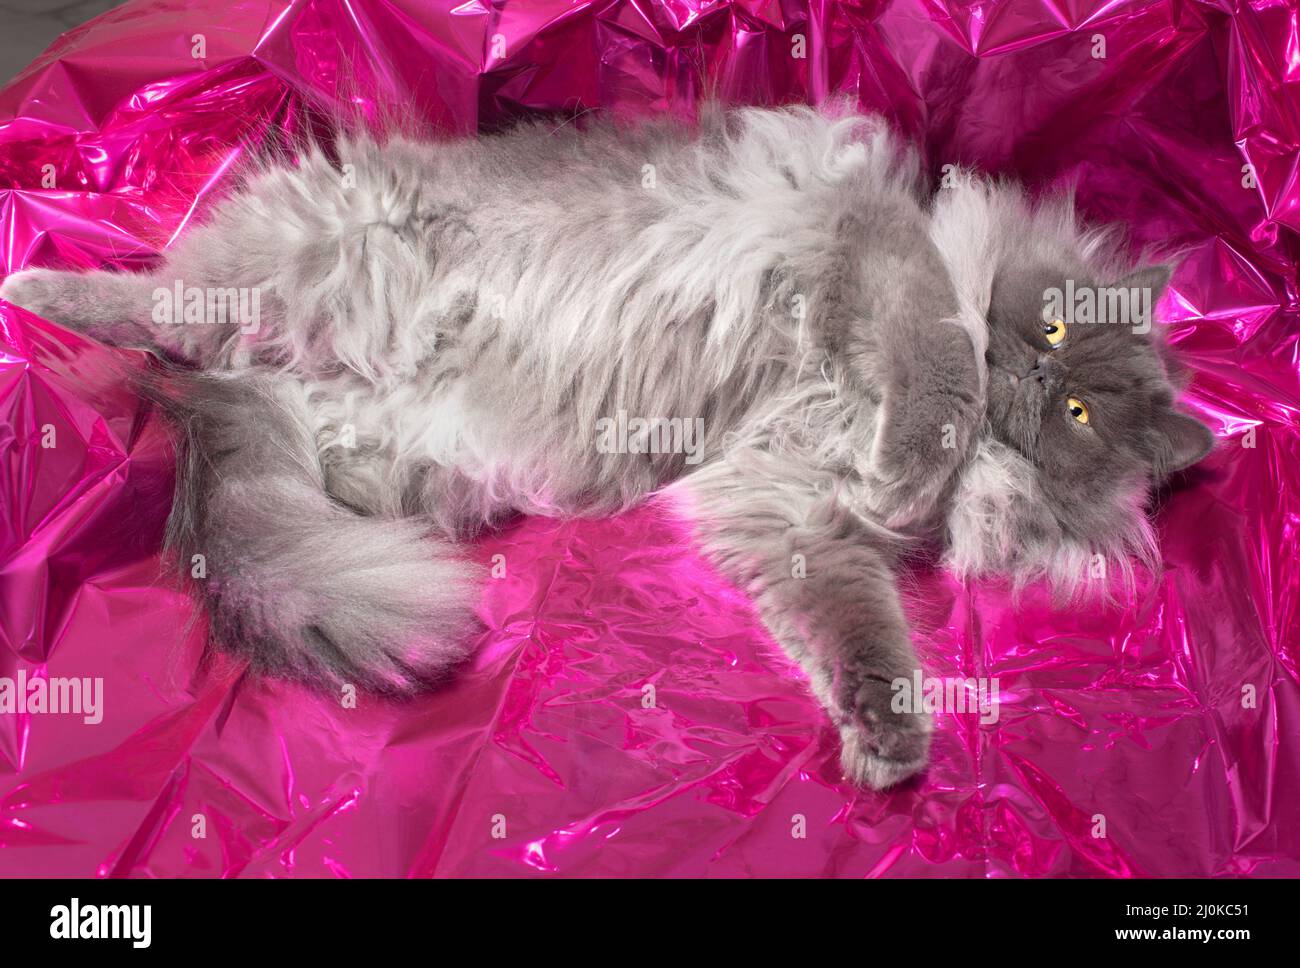 Cute fluffy long haired grey cat rolling around on shiny pink mylar. Stock Photo